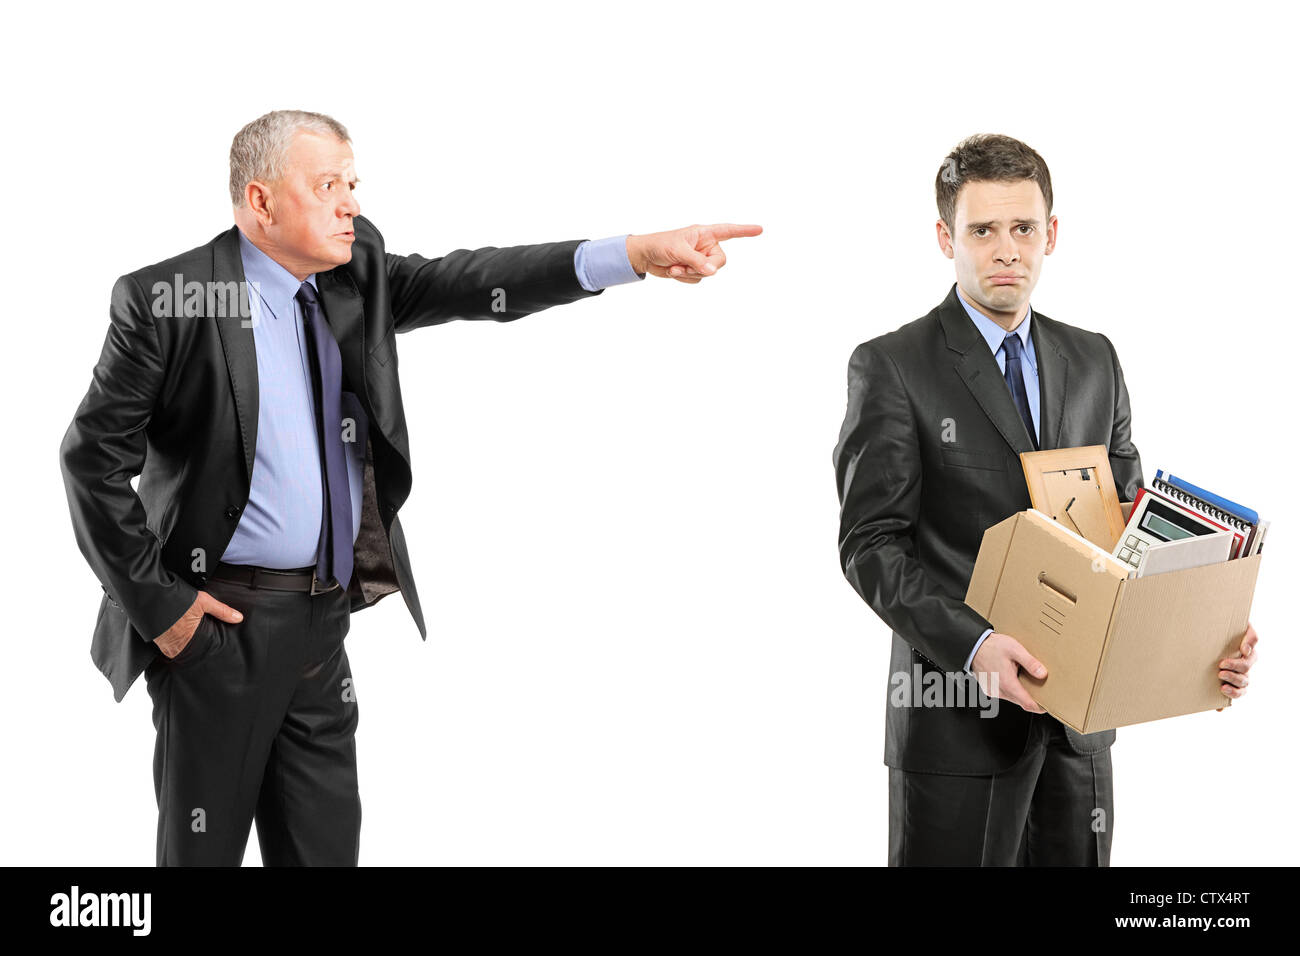 An angry boss firing a man carrying a box of personal items isolated on white background Stock Photo